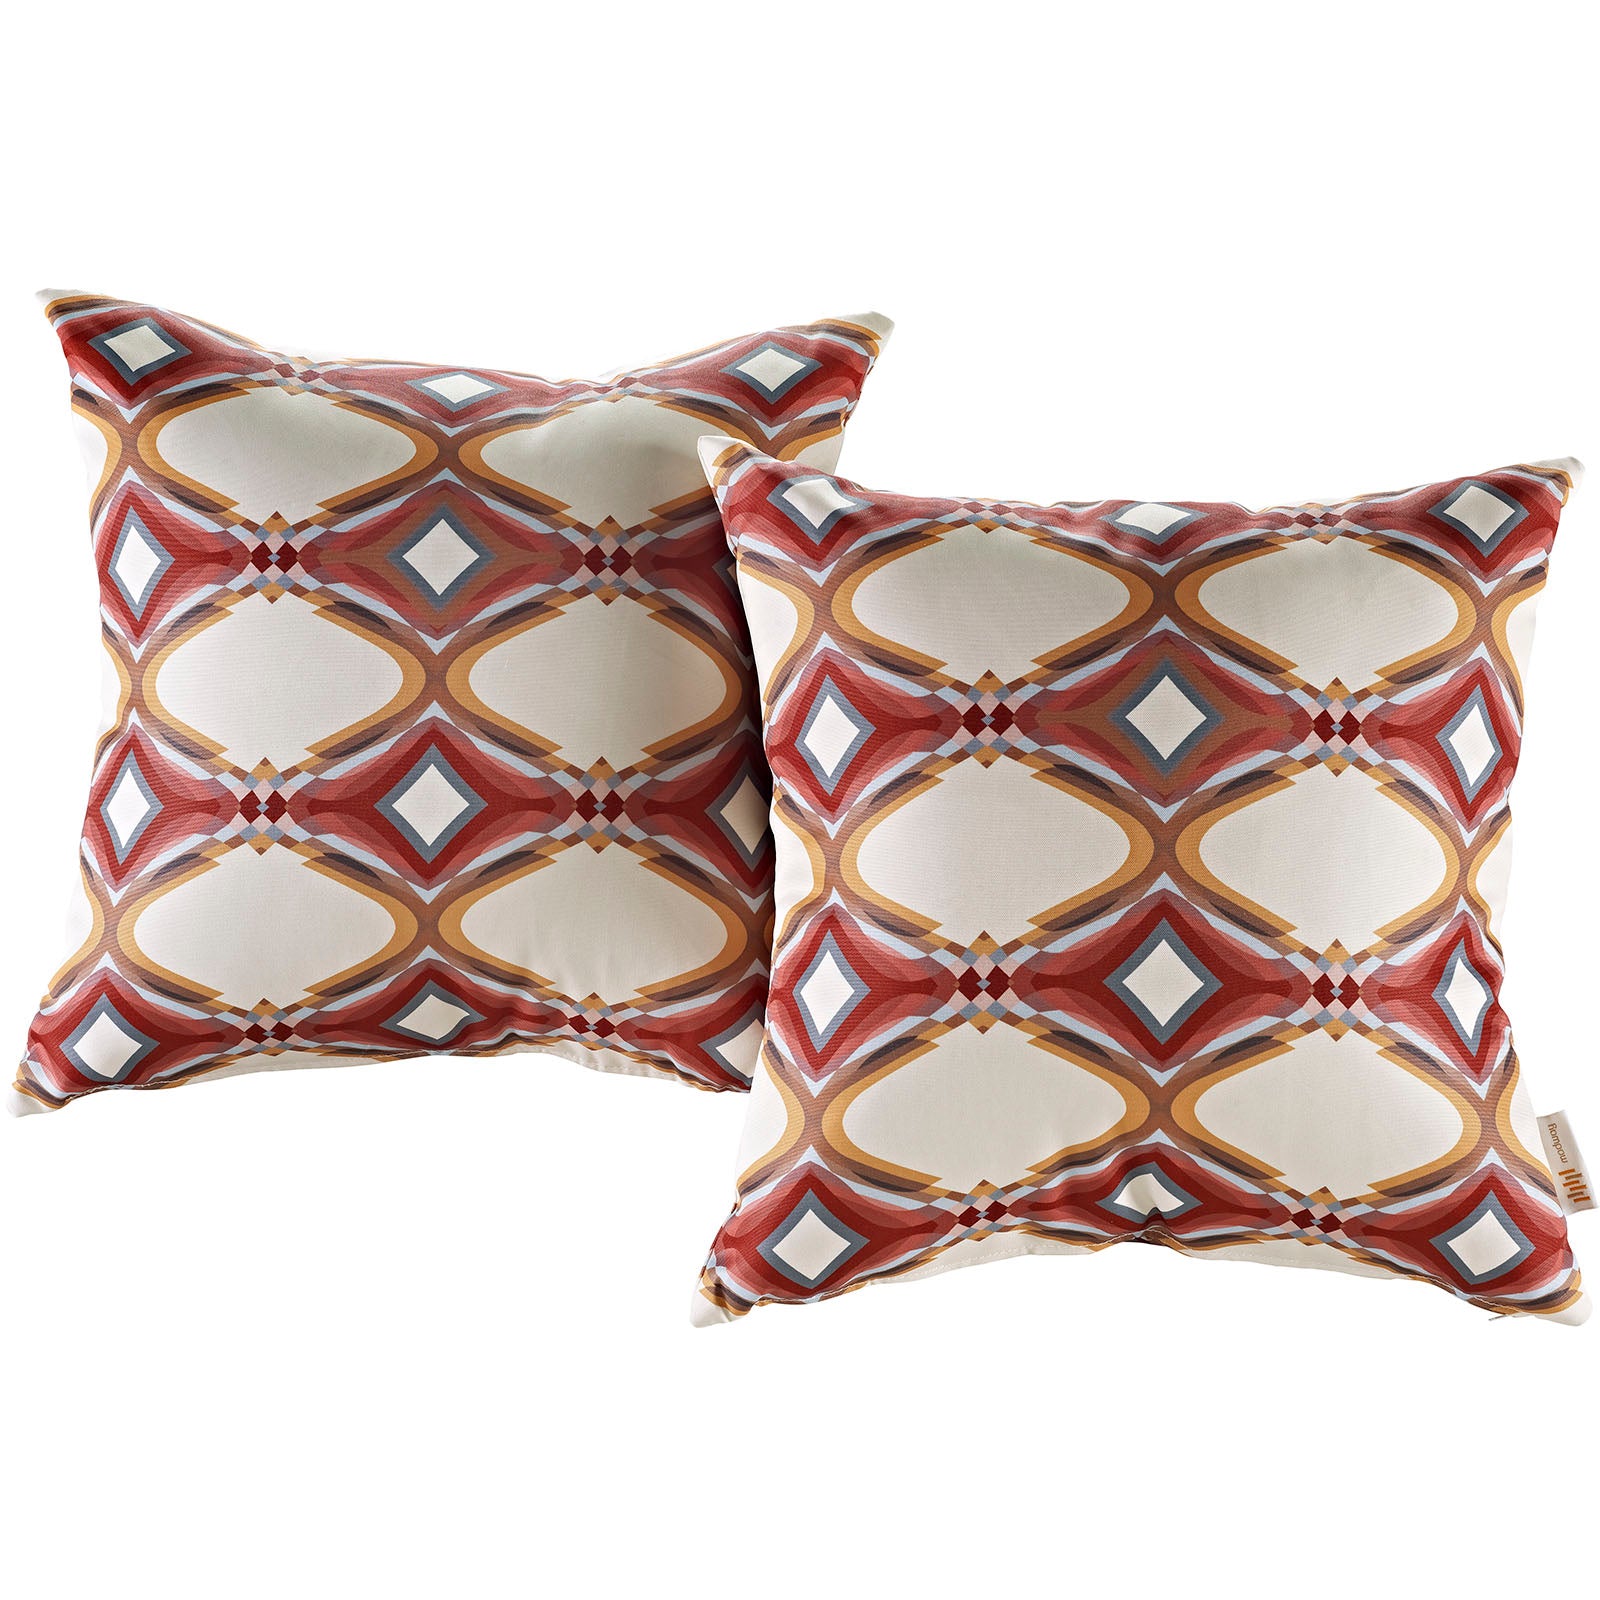 Modway Outdoor Pillows & Cushions - Modway Two Piece Outdoor Patio Pillow Set Repeat